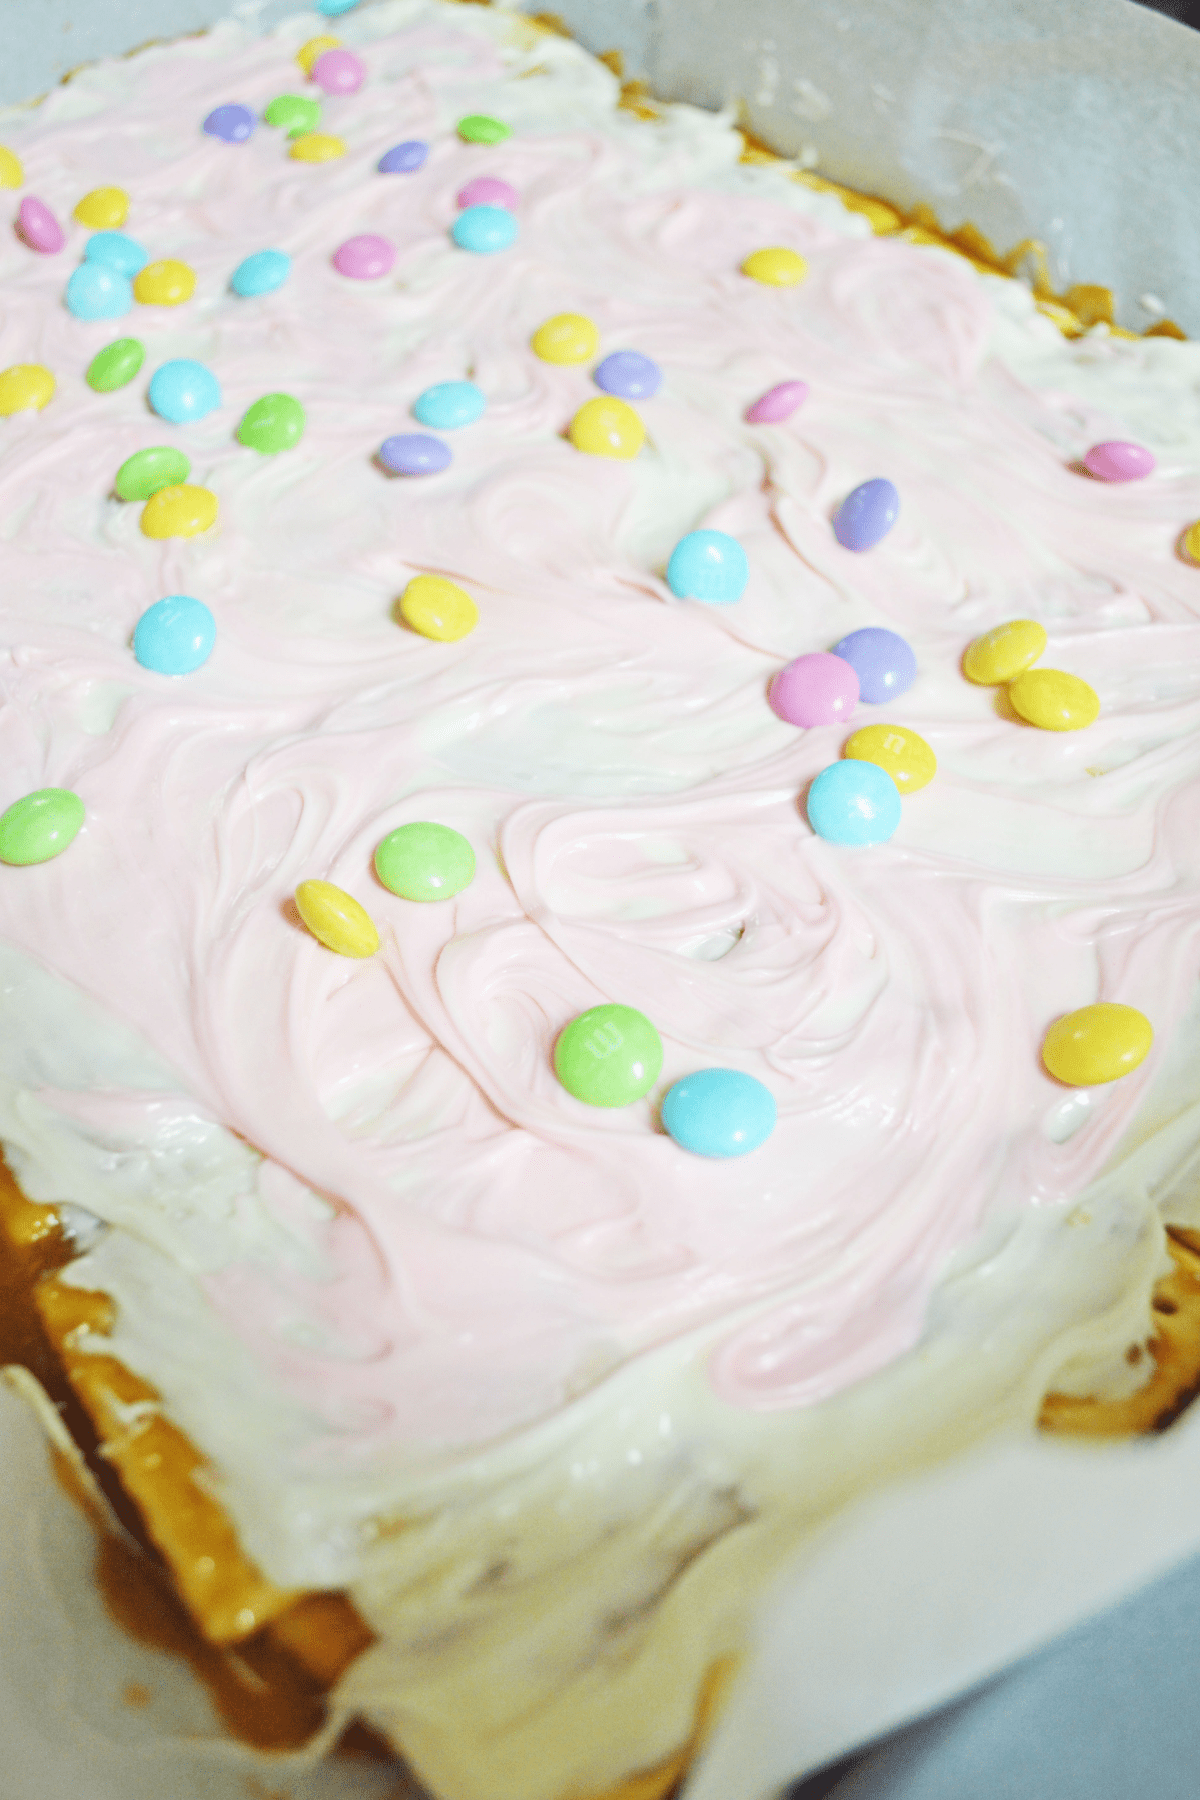 Toppings being added to Easter crack